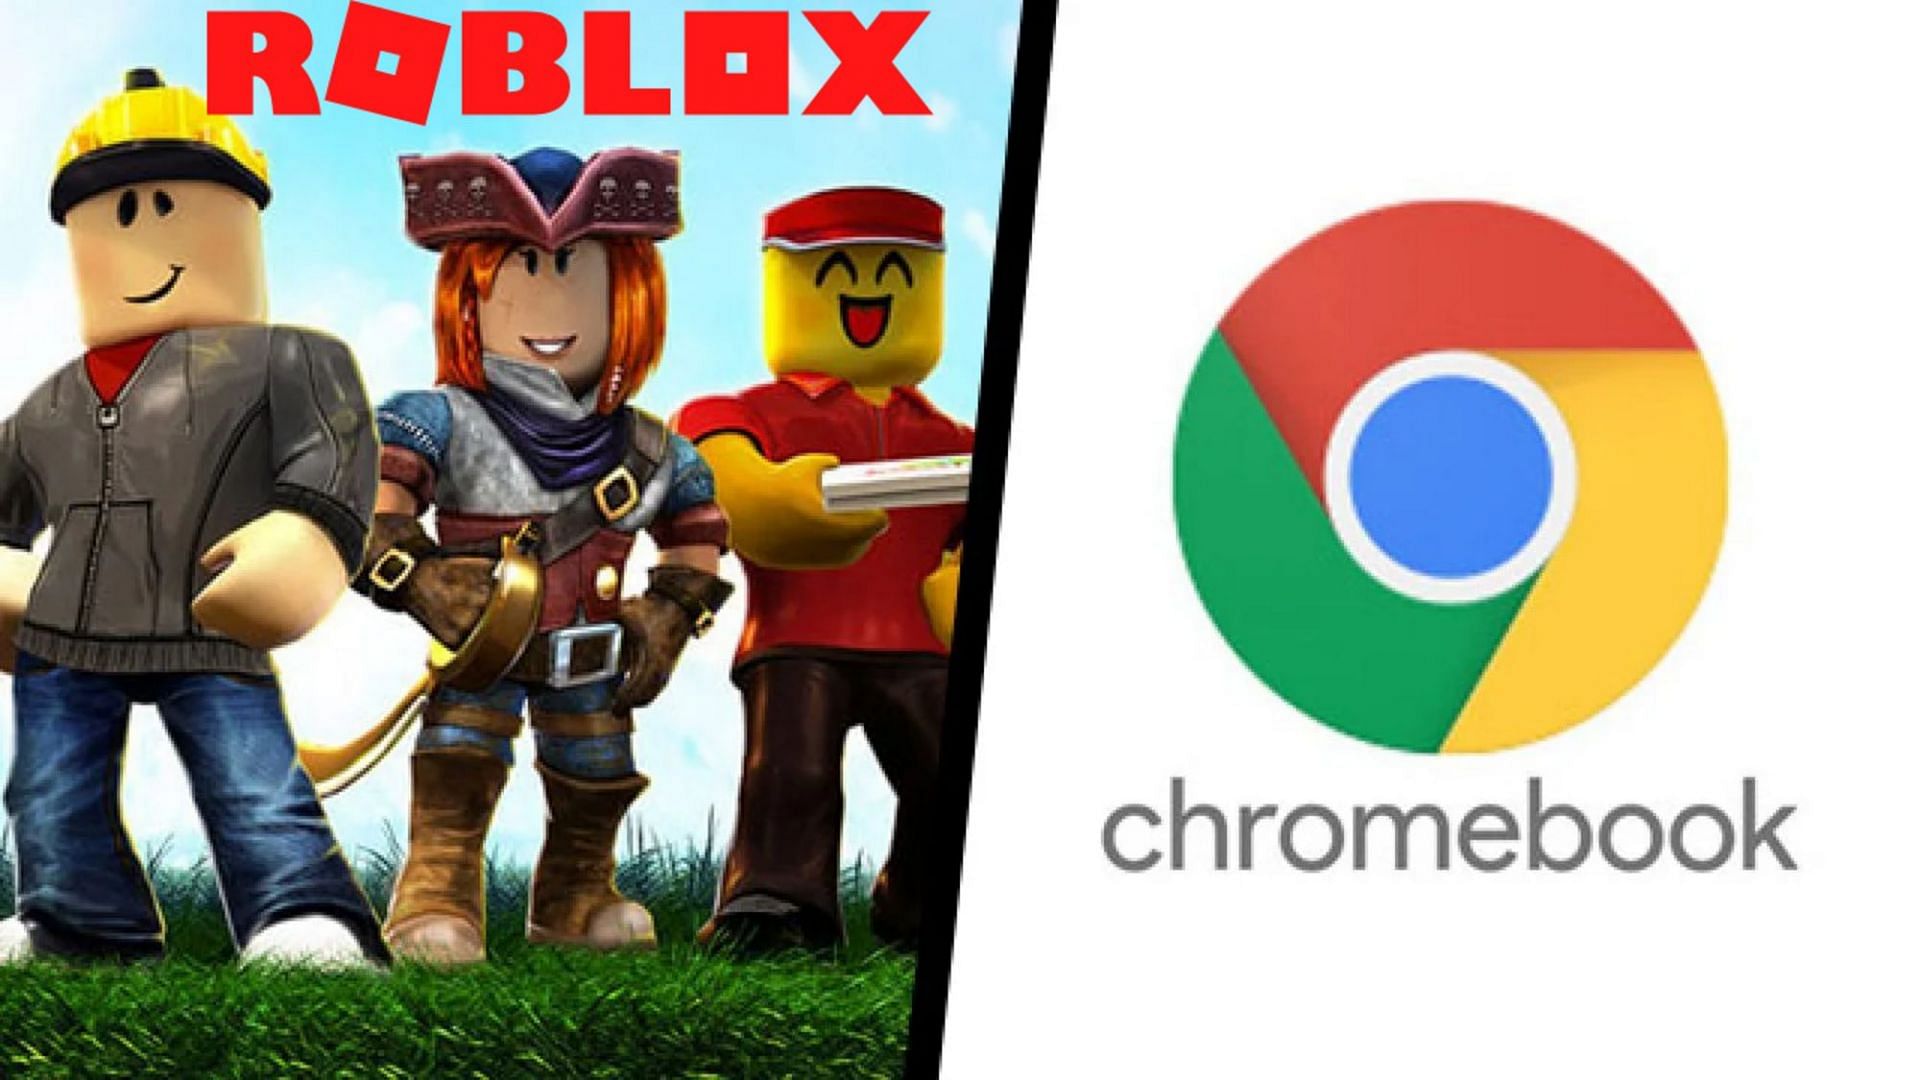 HOW TO PLAY ROBLOX ON SCHOOL CHROMEBOOKS! 